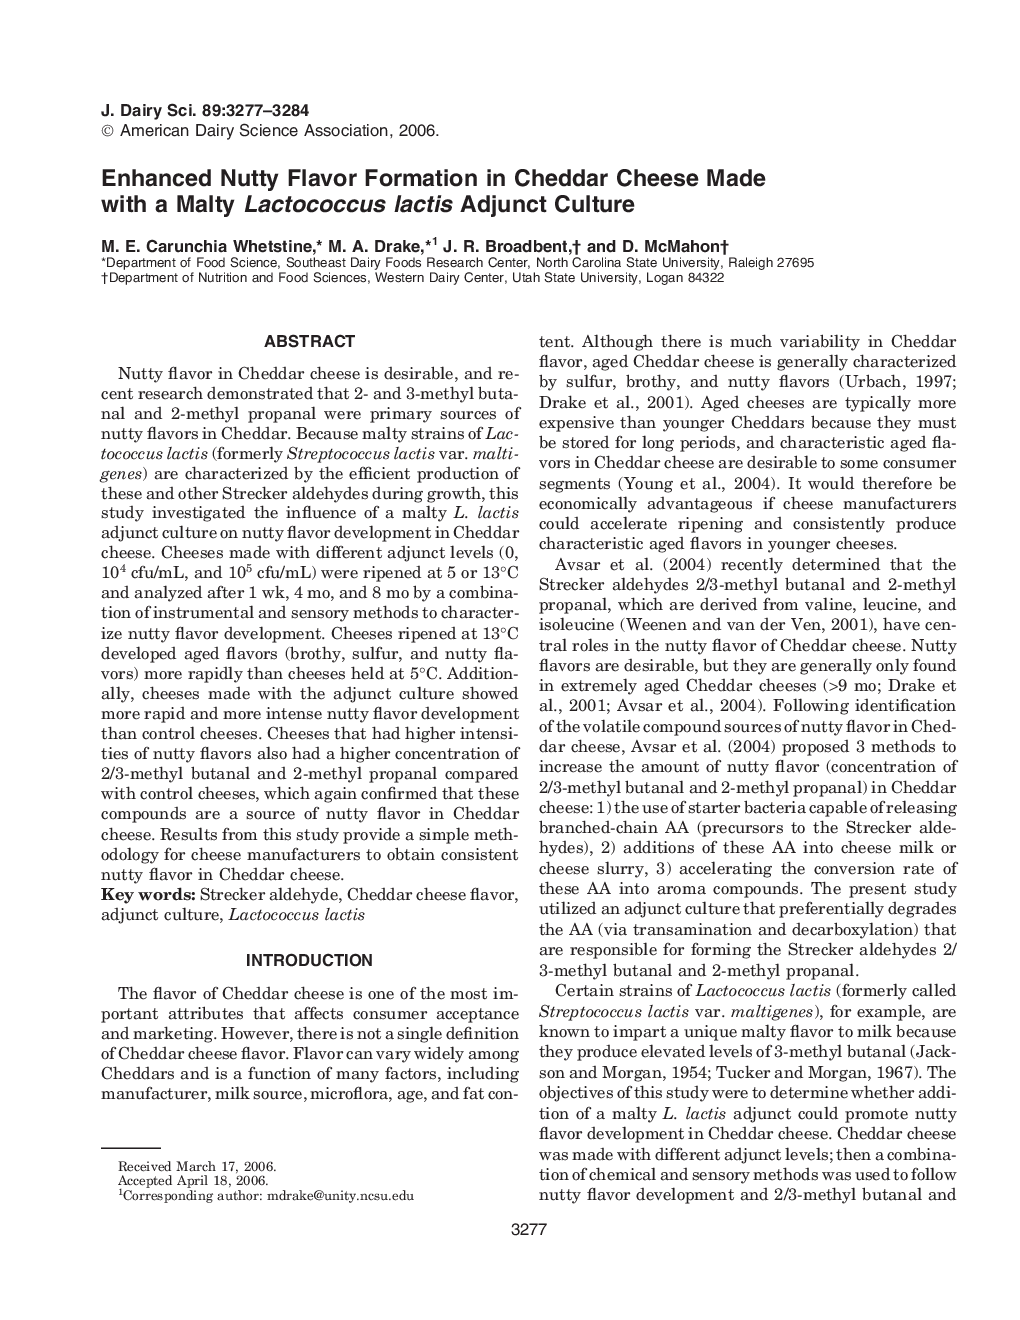 Enhanced Nutty Flavor Formation in Cheddar Cheese Made with a Malty Lactococcus lactis Adjunct Culture